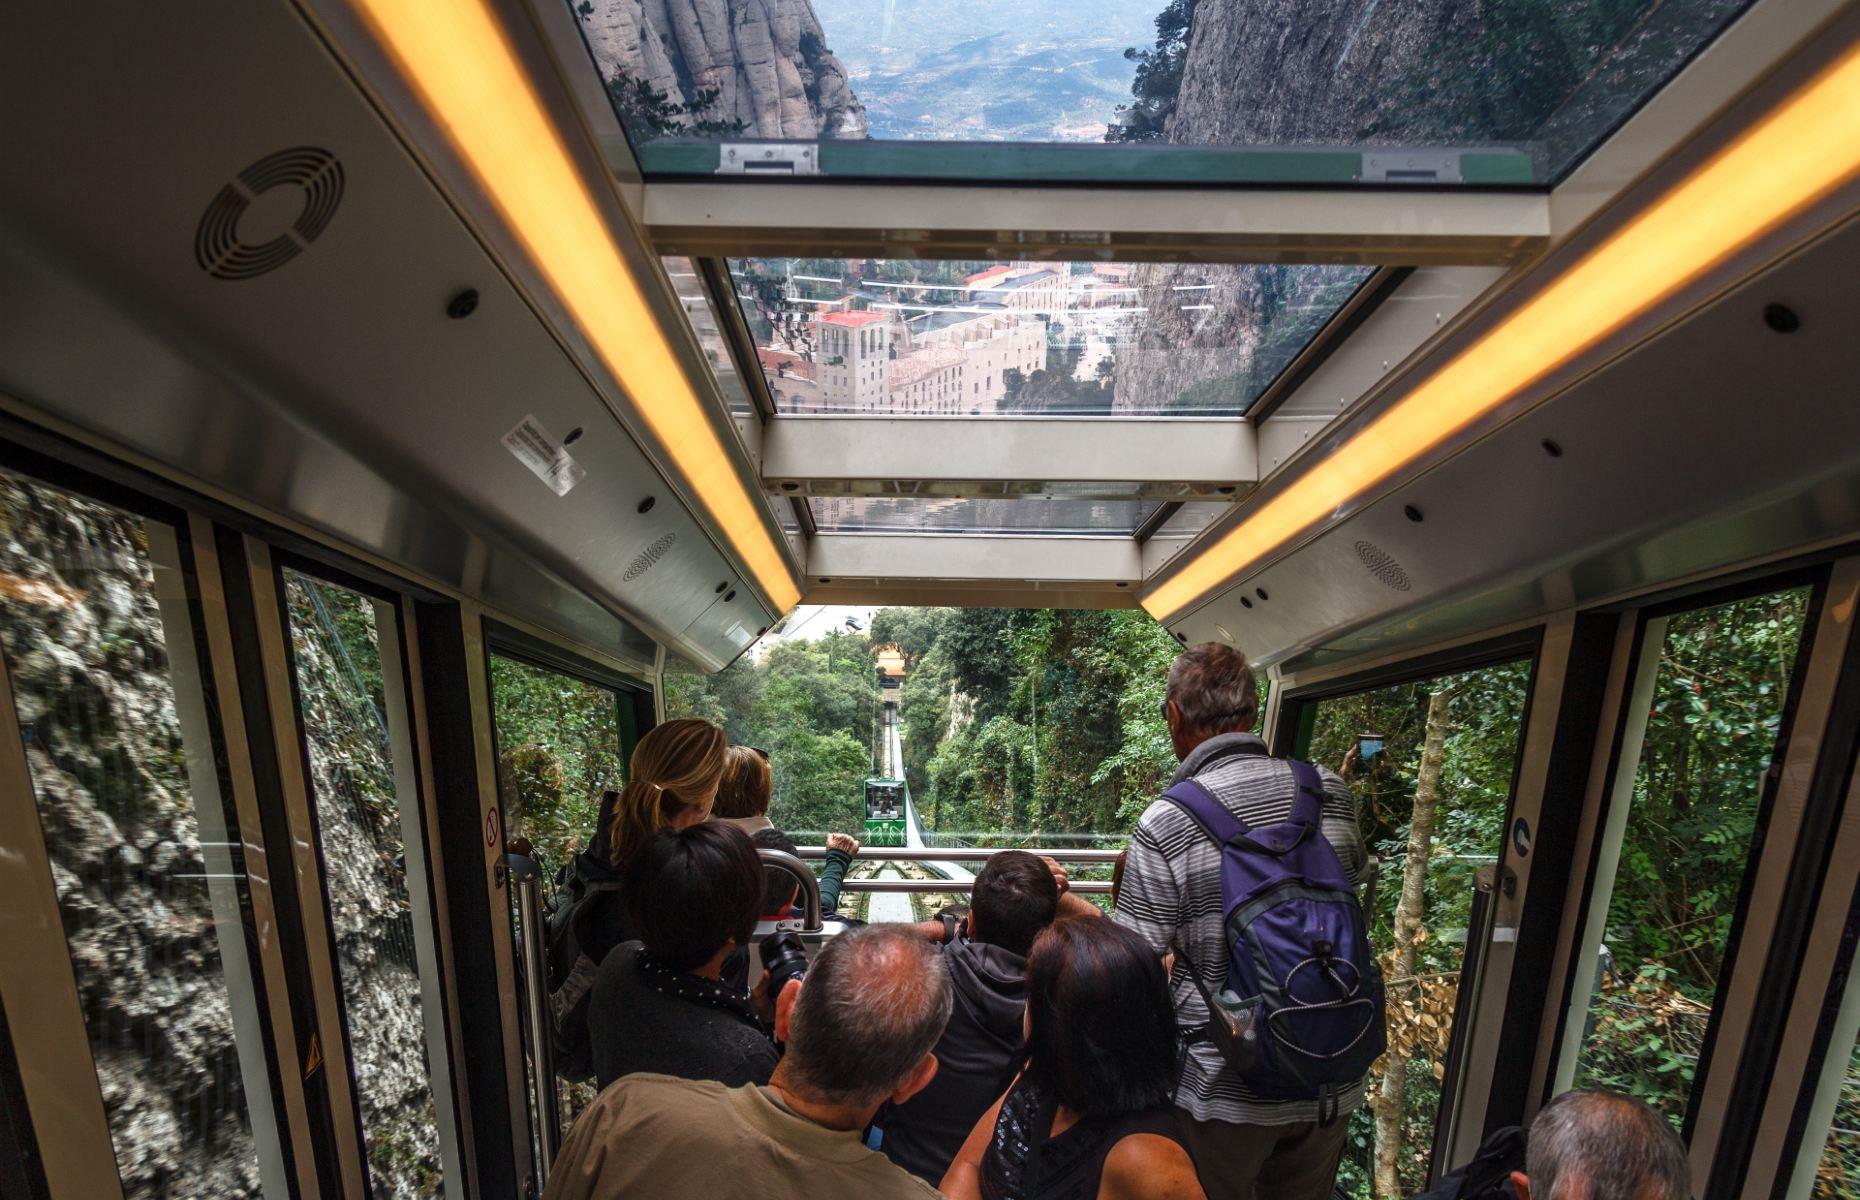 <p>A round-trip ticket, which includes either the Aeri or Cremallera option, costs $65 and takes around an hour and a half in total. If you want to go even higher, hitch a ride on the <a href="https://www.montserrat-tourist-guide.com/en/transport/funicular-sant-joan-montserrat.html">Saint Joan funicular</a> (pictured) which is included in the price of your ticket and takes you from the monastery right up to the top of the mountain.</p>